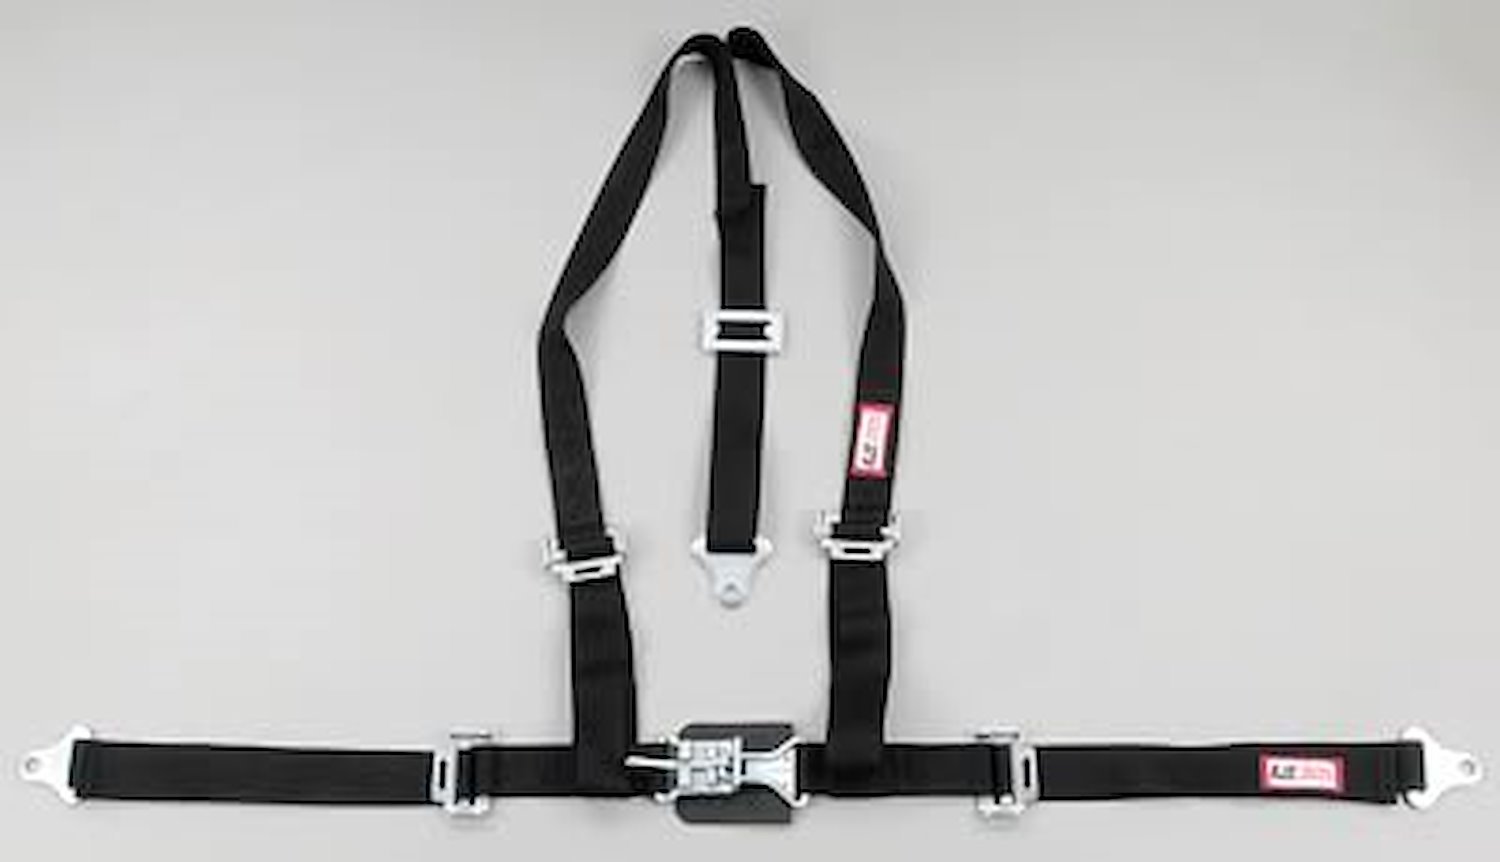 NON-SFI L&L HARNESS 2 PULL UP Lap Belt SEWN IN 2 S.H. Y FLOOR Mount ALL WRAP ENDS RED